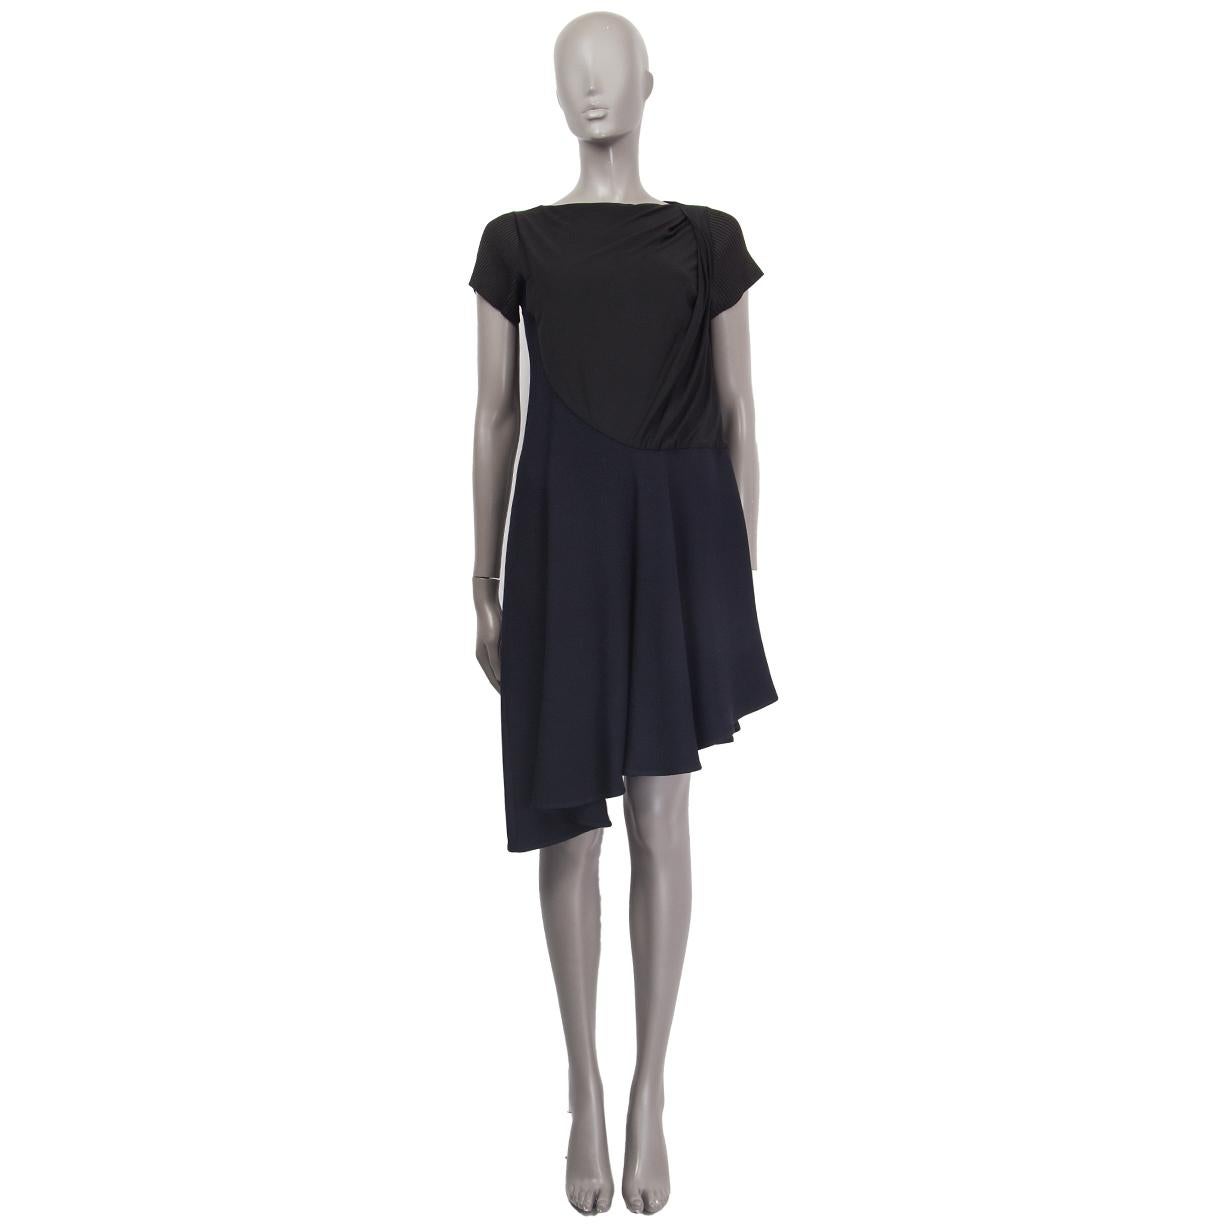 100% authentic Balenciaga short sleeve a-line dress with top in black jersey and bottom in navy blue. Has rib sleeves. Unlined. Has been worn and is in excellent condition.

Measurements
Tag Size	38
Size	S
Shoulder Width	34cm (13.3in)
Bust	86cm